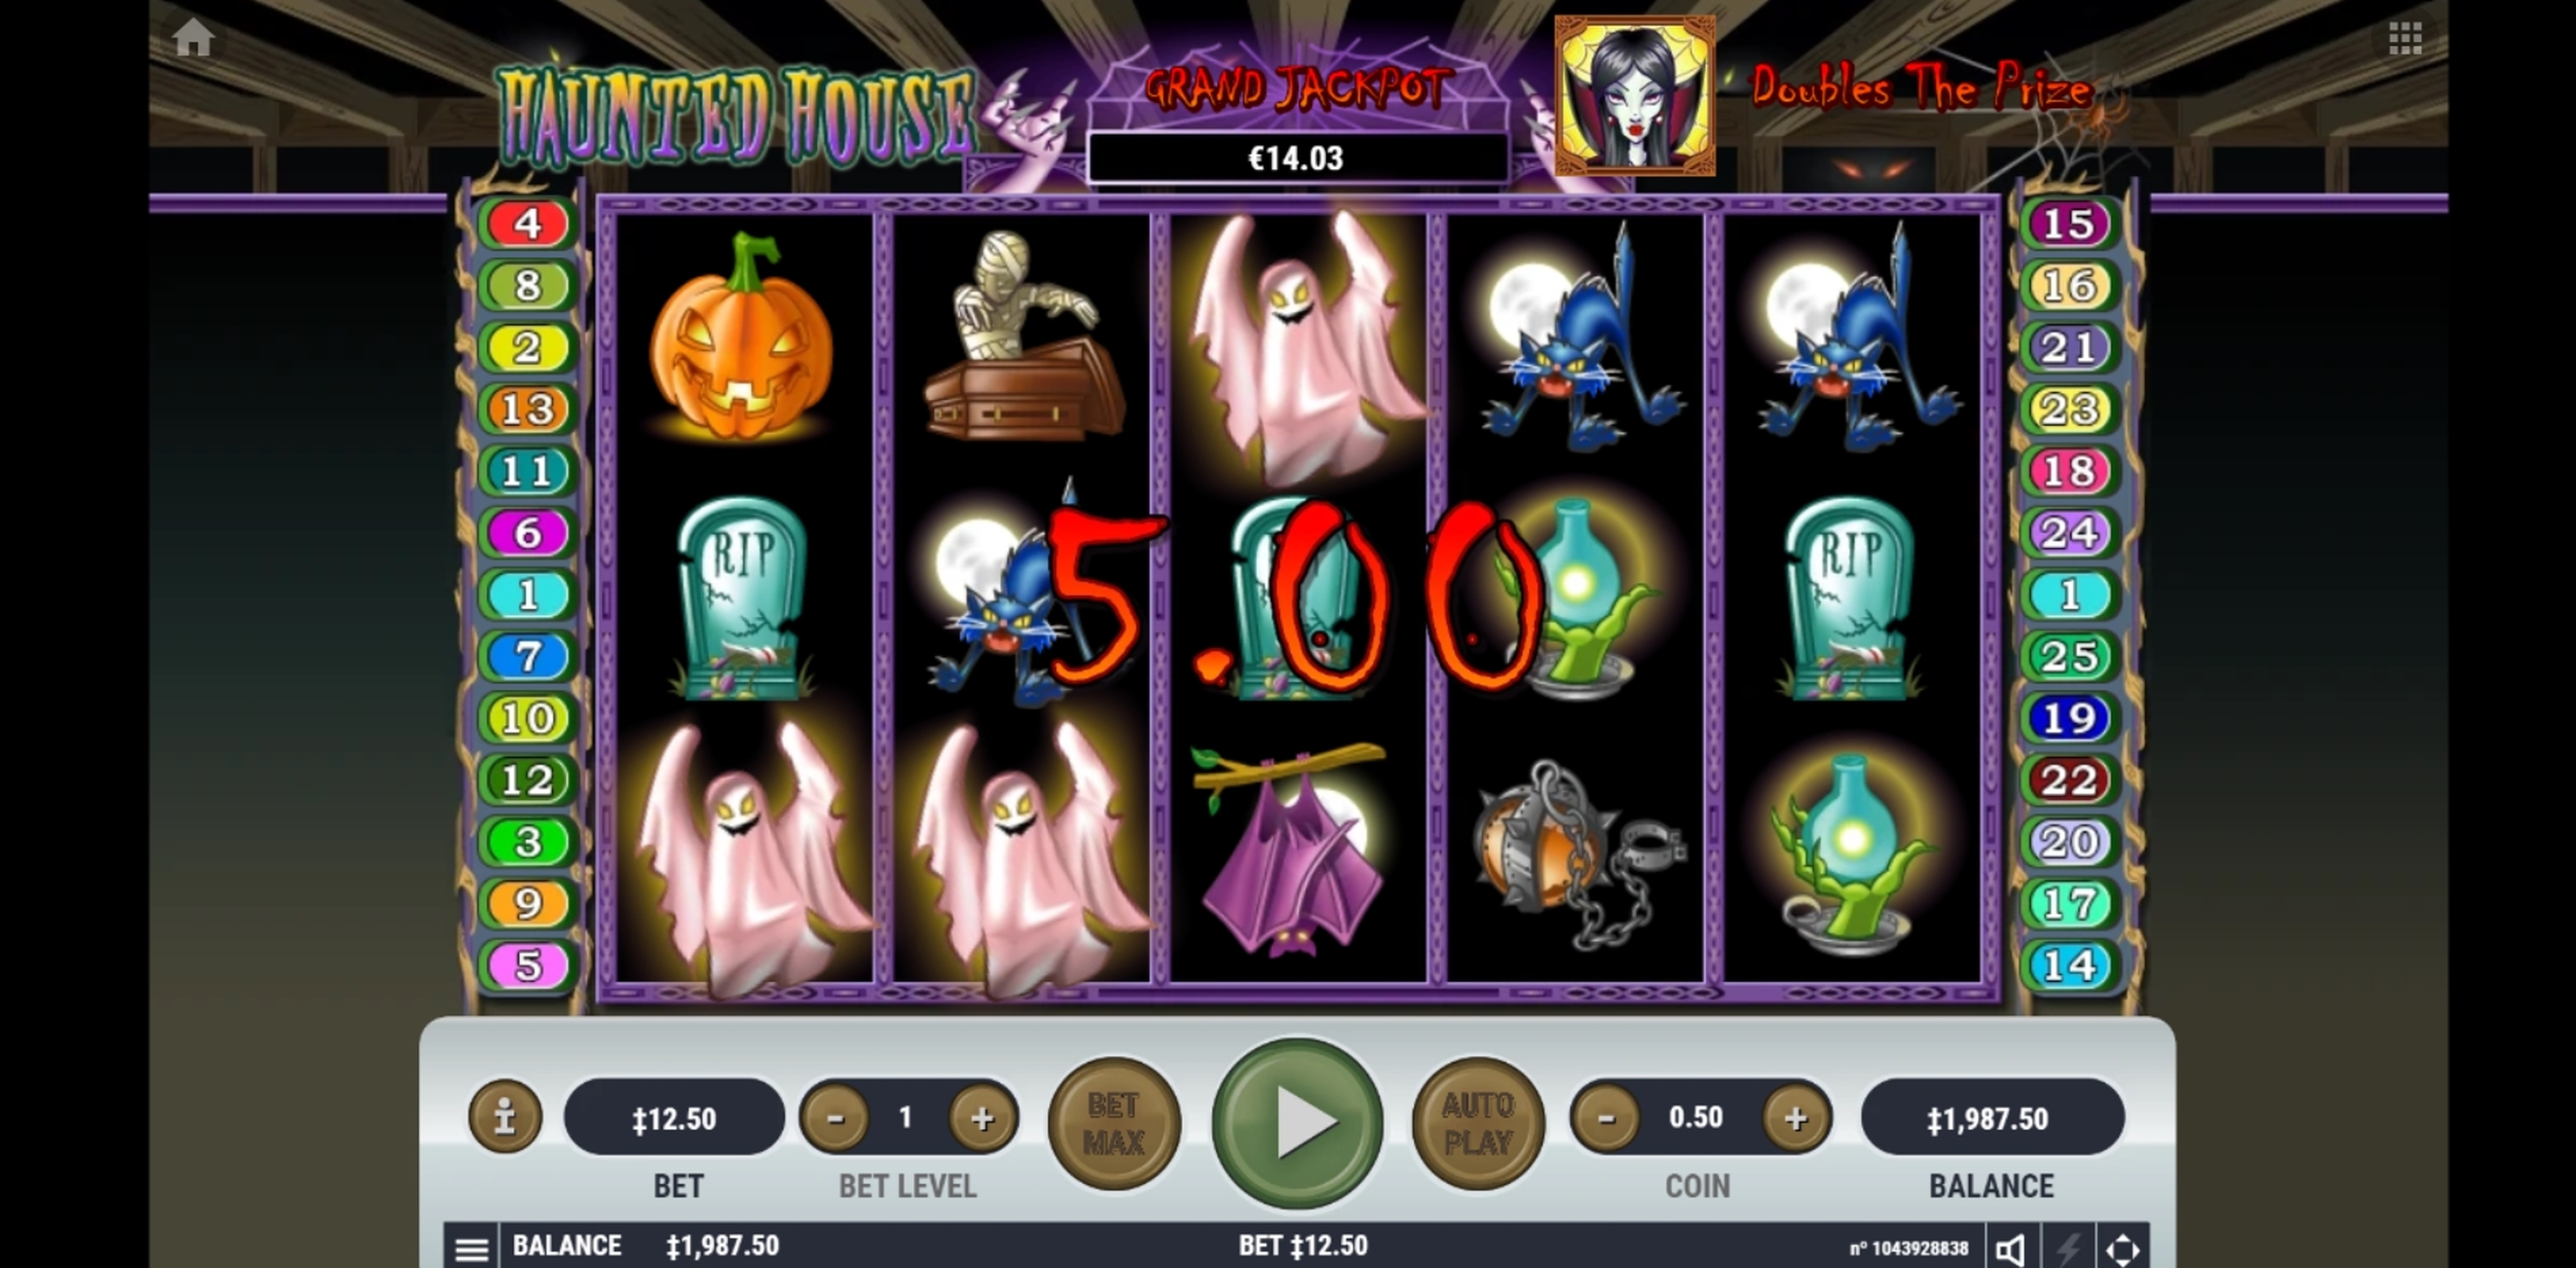 Win Money in Haunted House Free Slot Game by Habanero